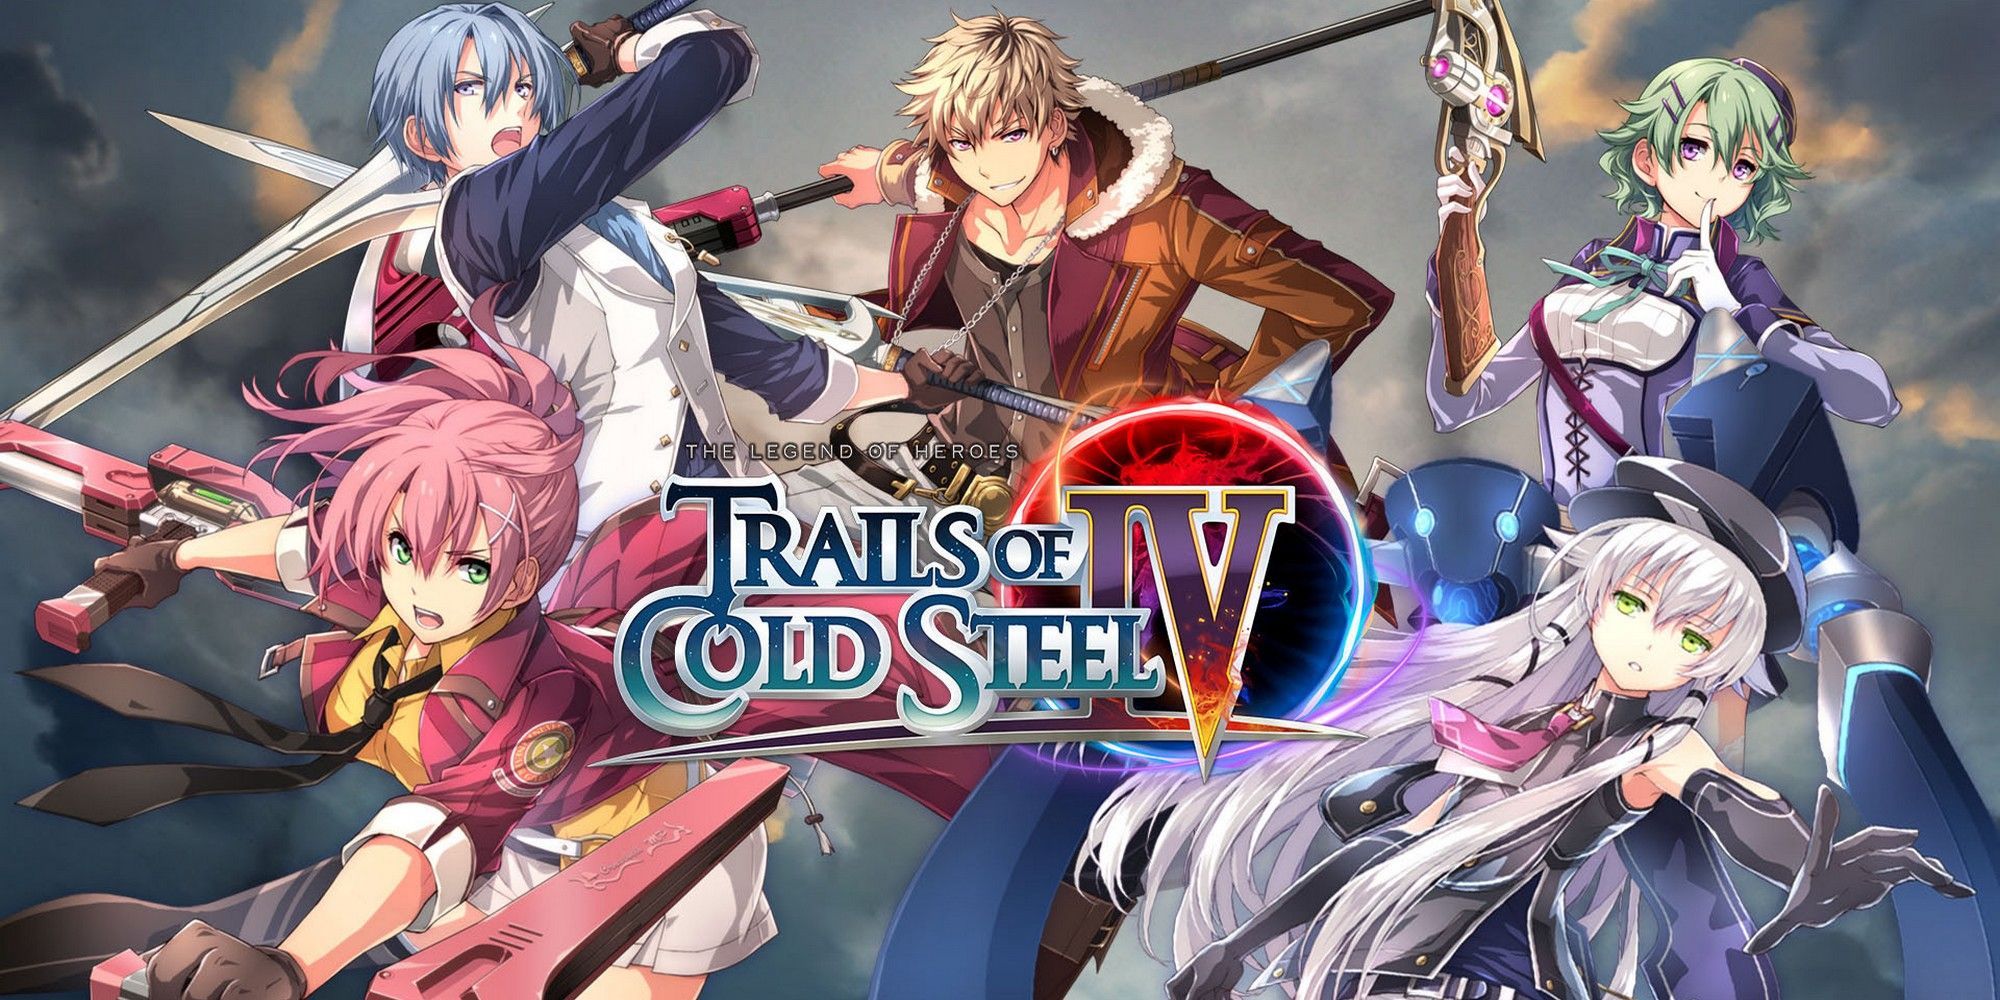 legends of heroes trials of cold steel four art